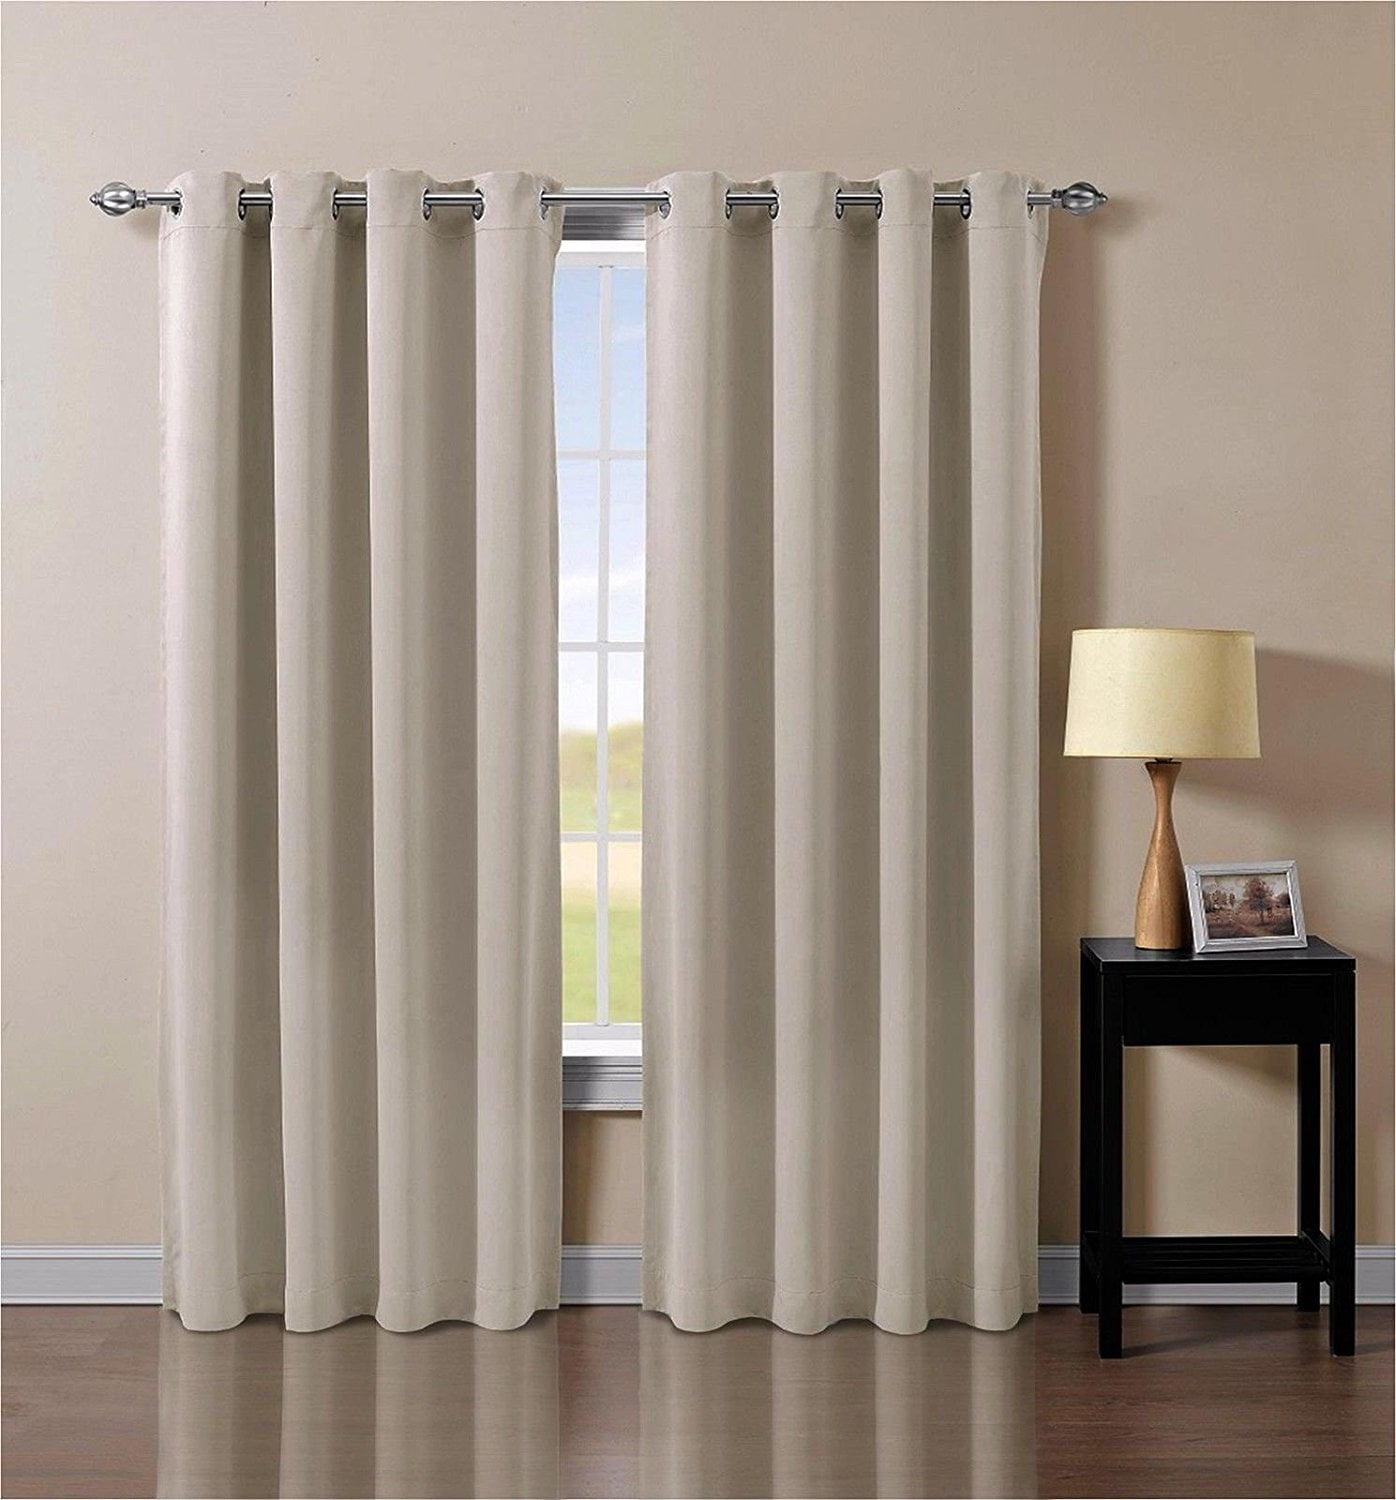 Blackout Window Curtain Panel: Silver Grommets 52"W x 90"L Taupe Single 1 